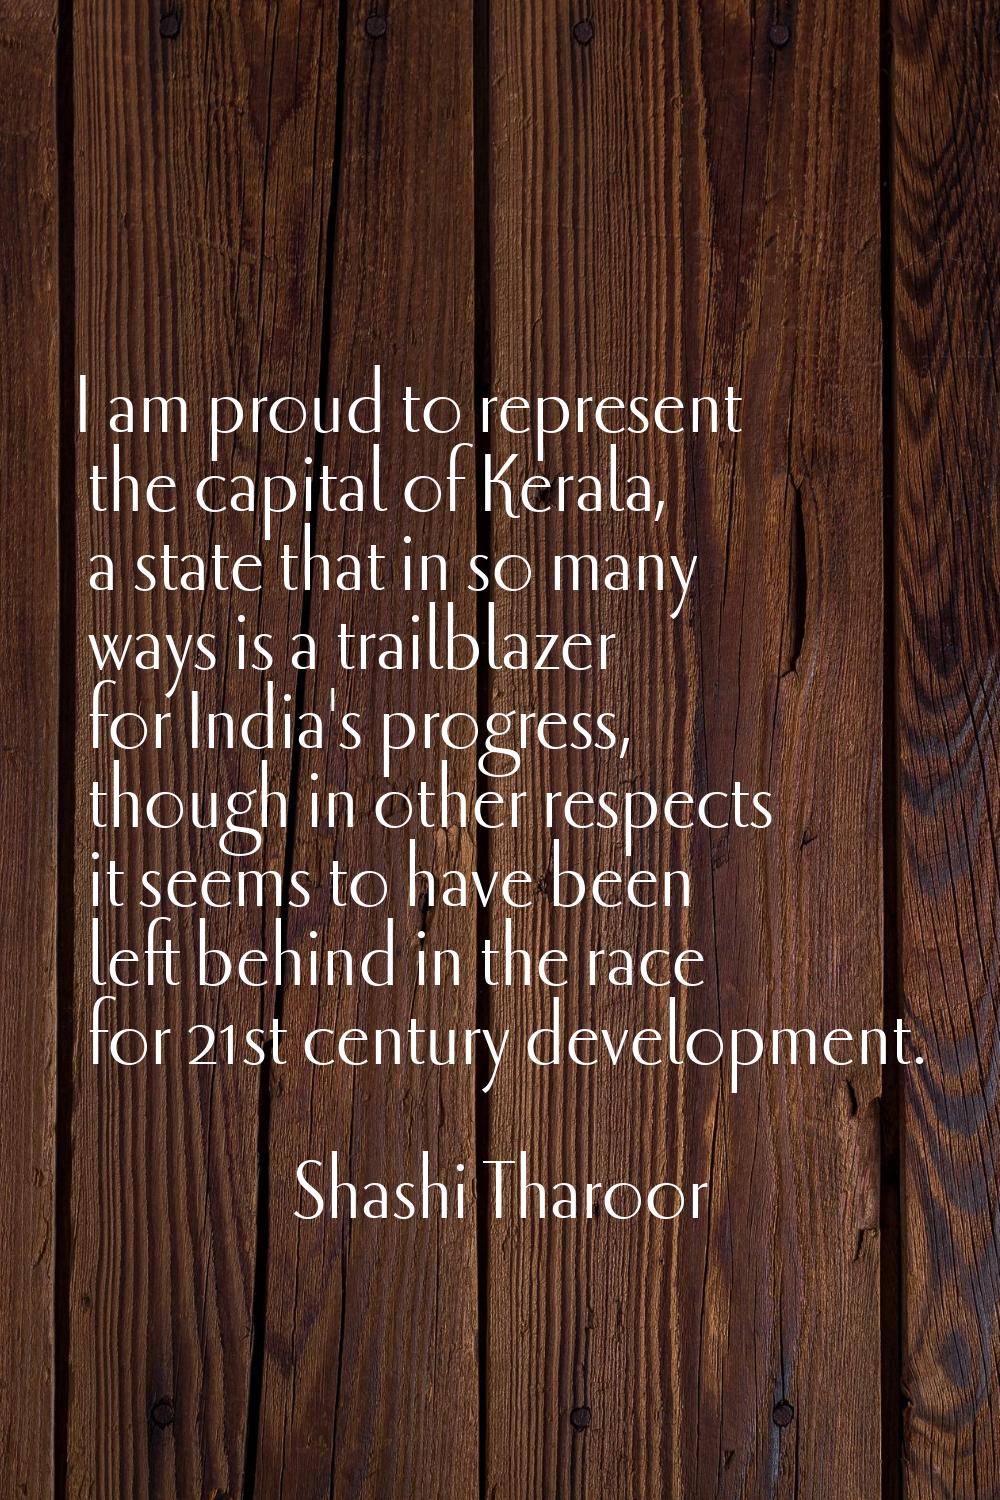 I am proud to represent the capital of Kerala, a state that in so many ways is a trailblazer for In